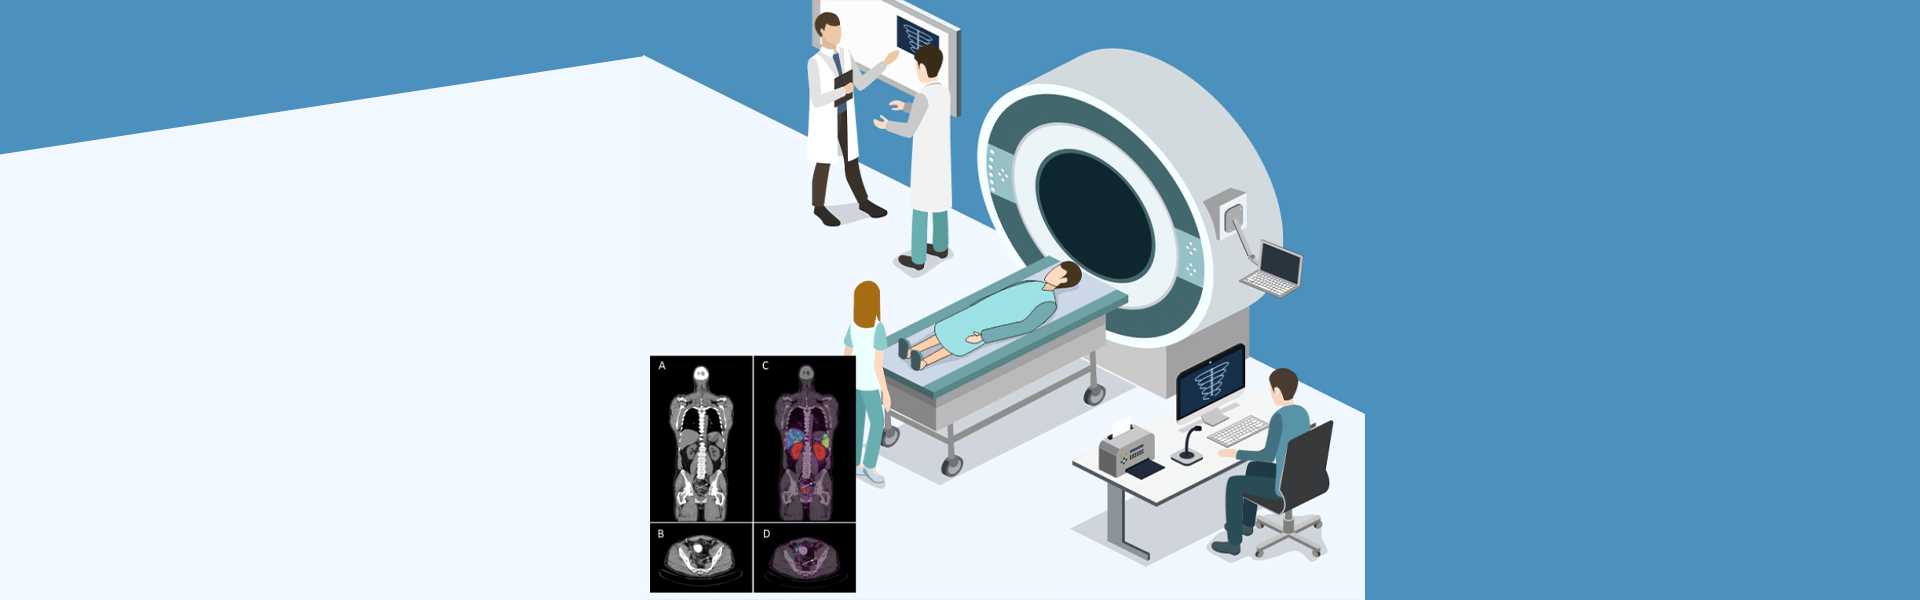 Nuclear Medicine - PSMA PET-CT Scan in Baner, Pune